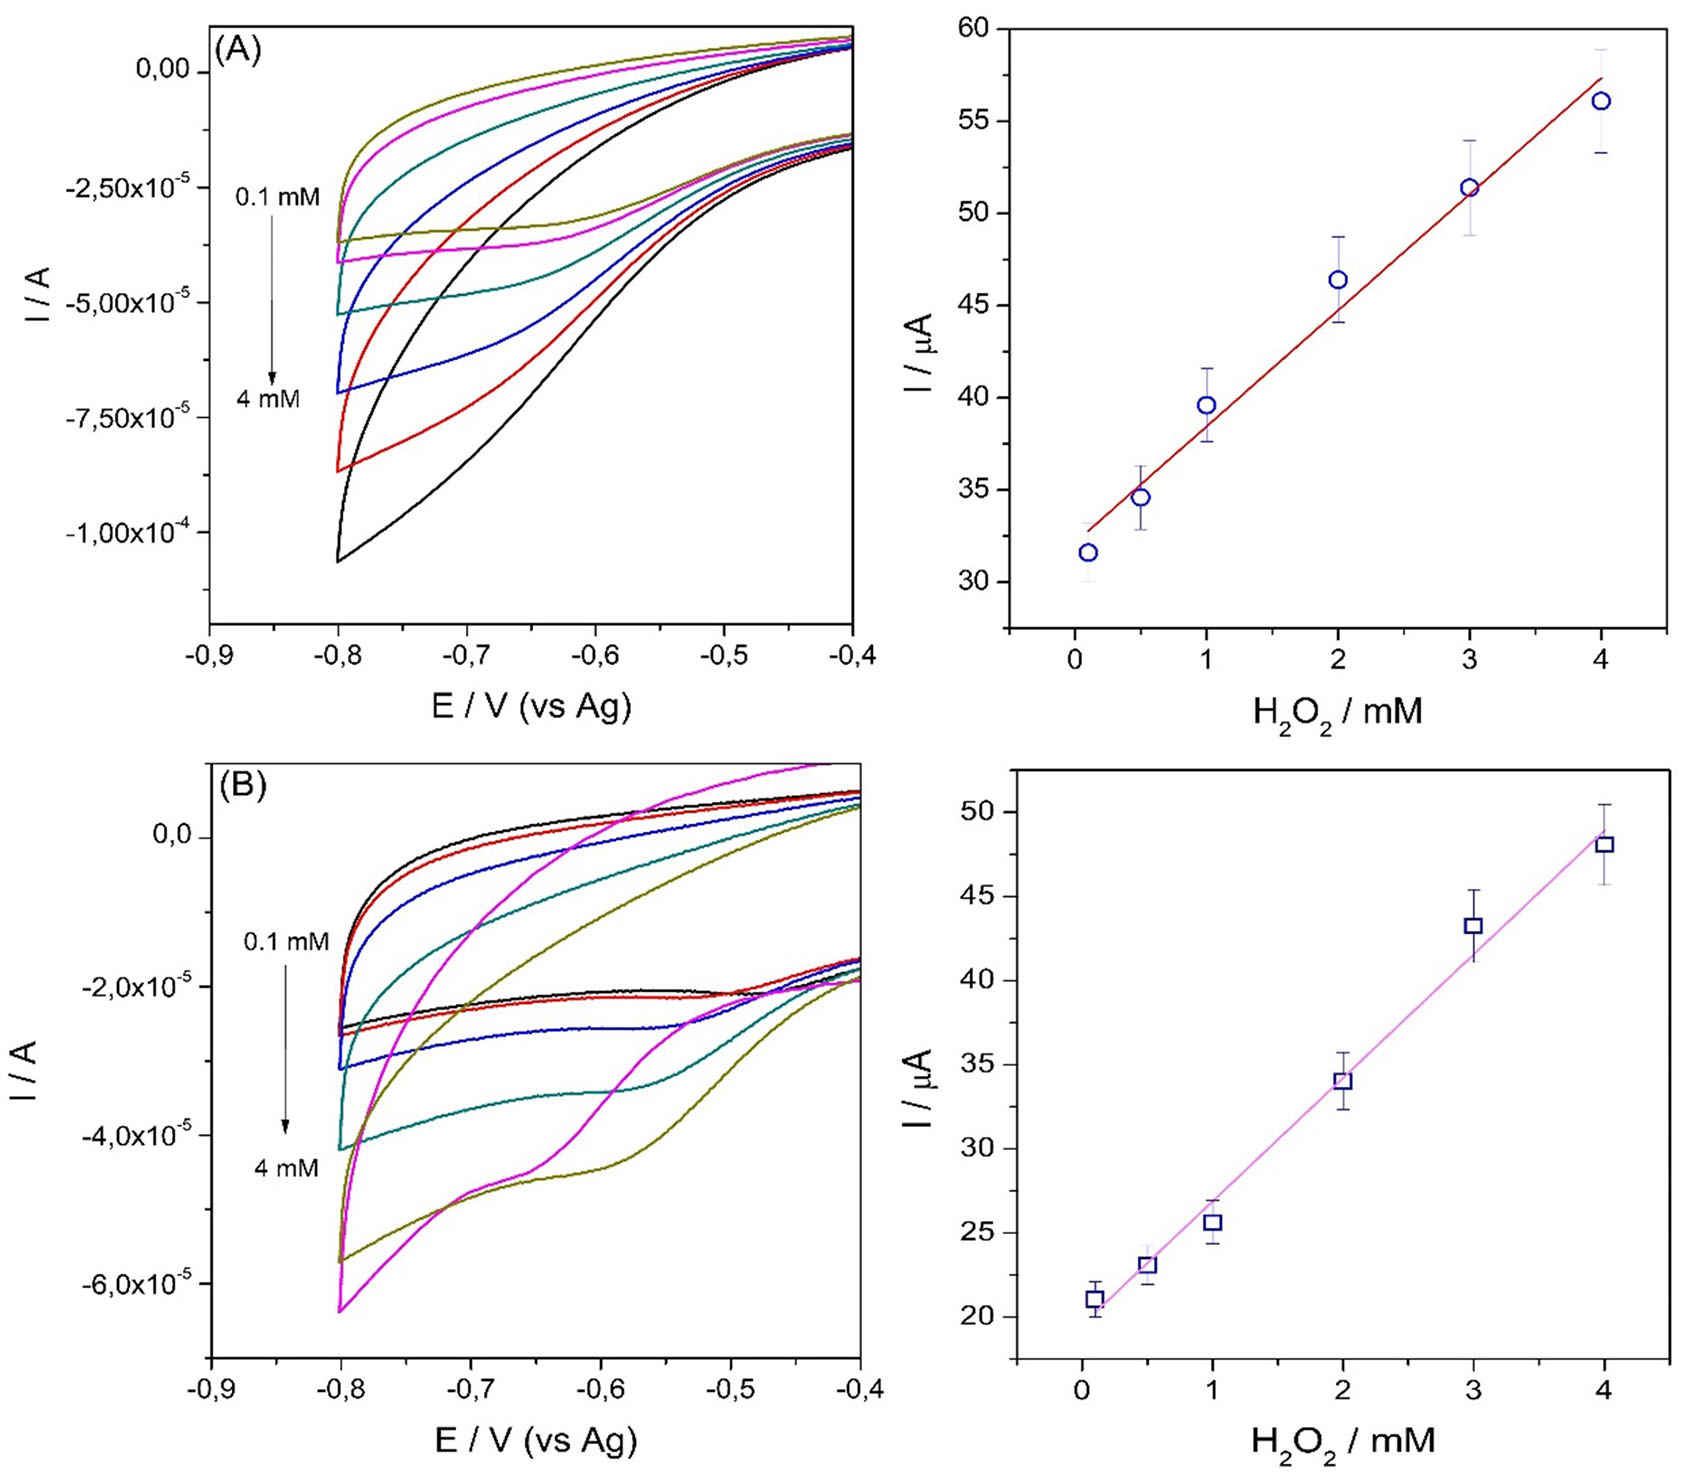 Cyclic voltammograms and calibration curves of (A) SPGE-GGP (0.1 (dark yellow); 0.5 (magenta); 1 (blue); 2 (dark cyan), 3(red), and 4 (black) mM); and (B) SPGOE-GGP (0.1 (black); 0.5 (red); 1 (blue); 2 (dark cyan); 3 (magenta), and 4 (dark cyan) mM) at different concentrations of H2O2 scan rate 50 mV/s.